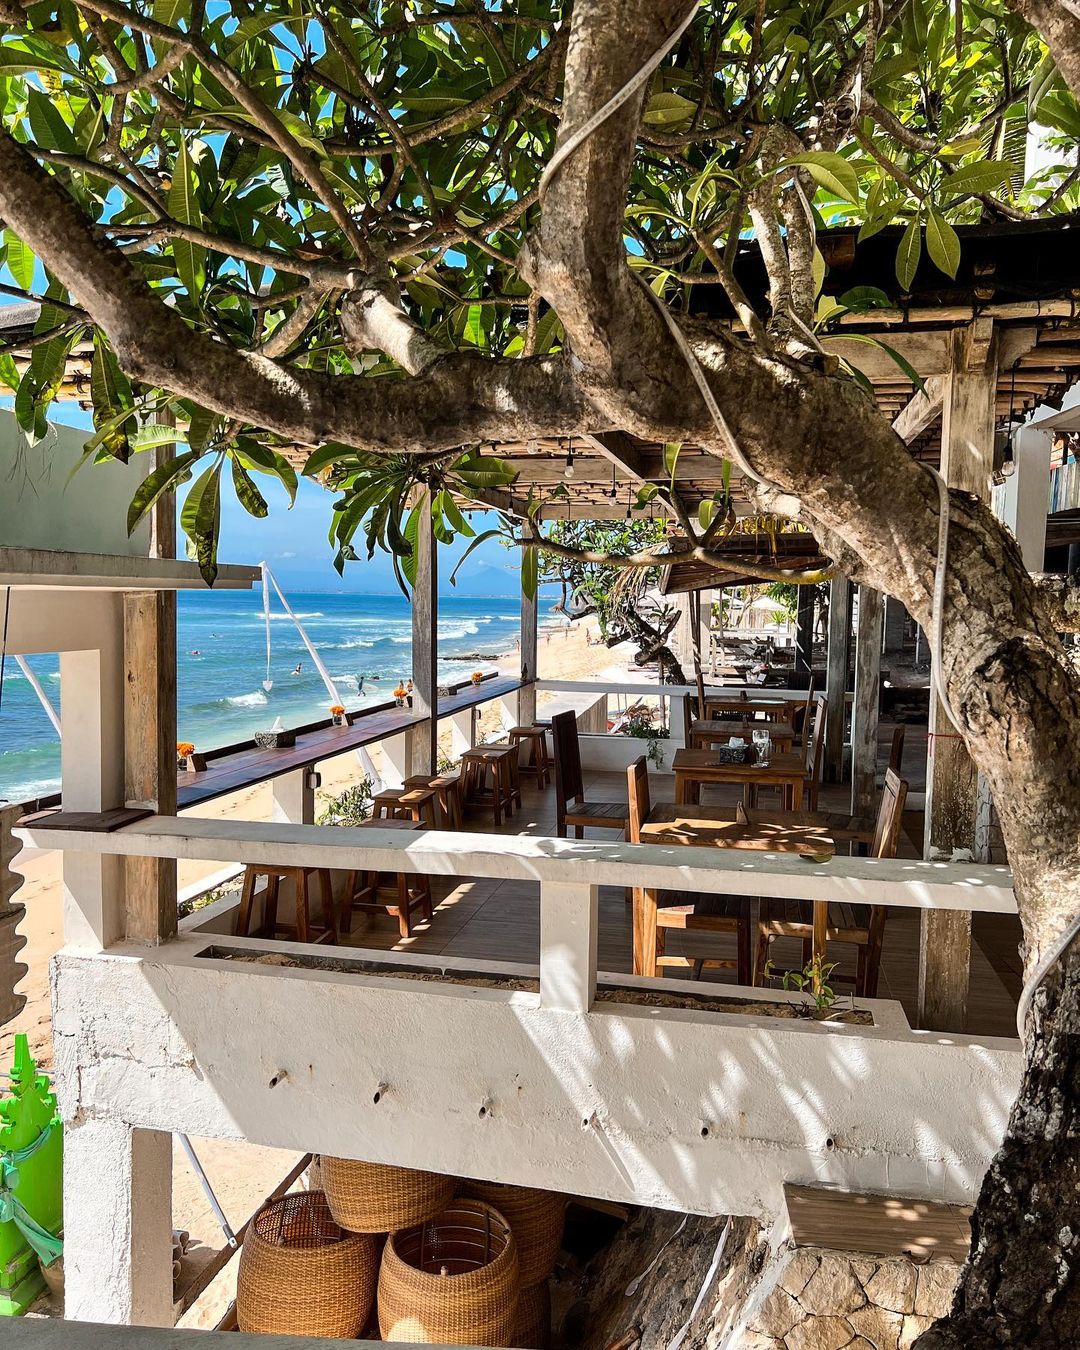 Review Jimmy Beach Cafe Bali Image From @bali_island_guide